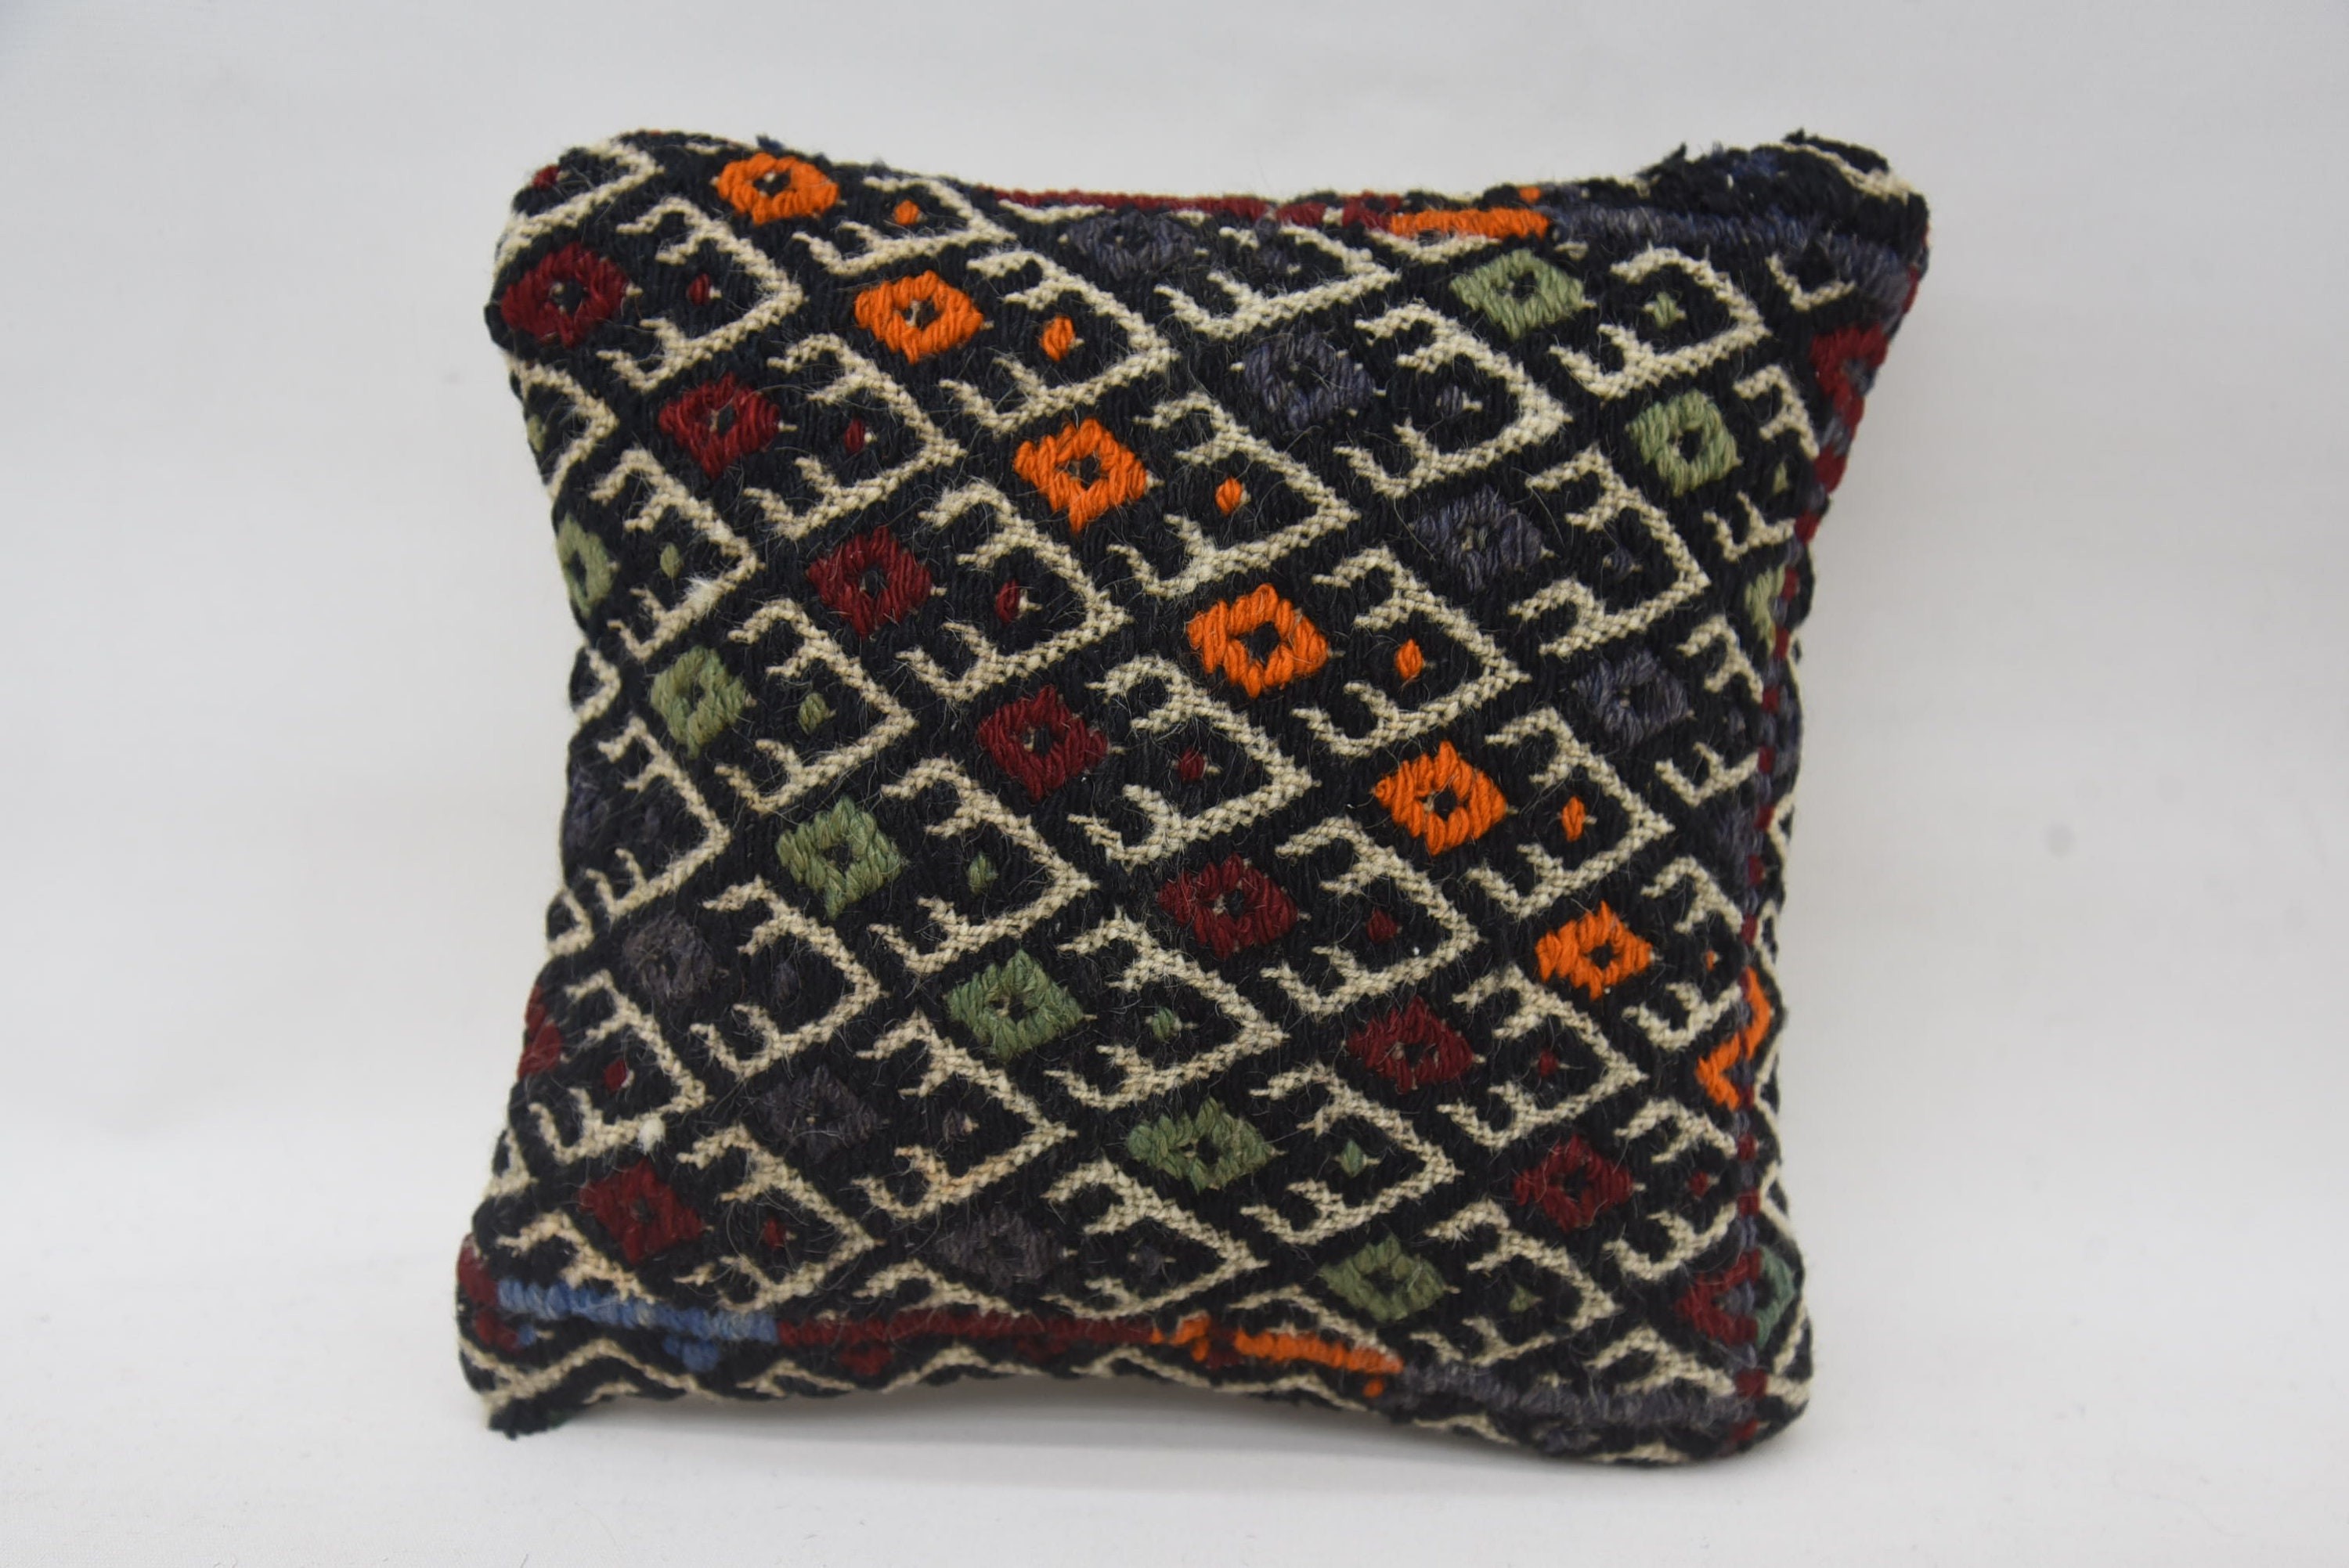 One Of A Kind Pillow Case, 12"x12" Red Cushion, Interior Designer Pillow, Pillow for Couch, Handmade Kilim Cushion